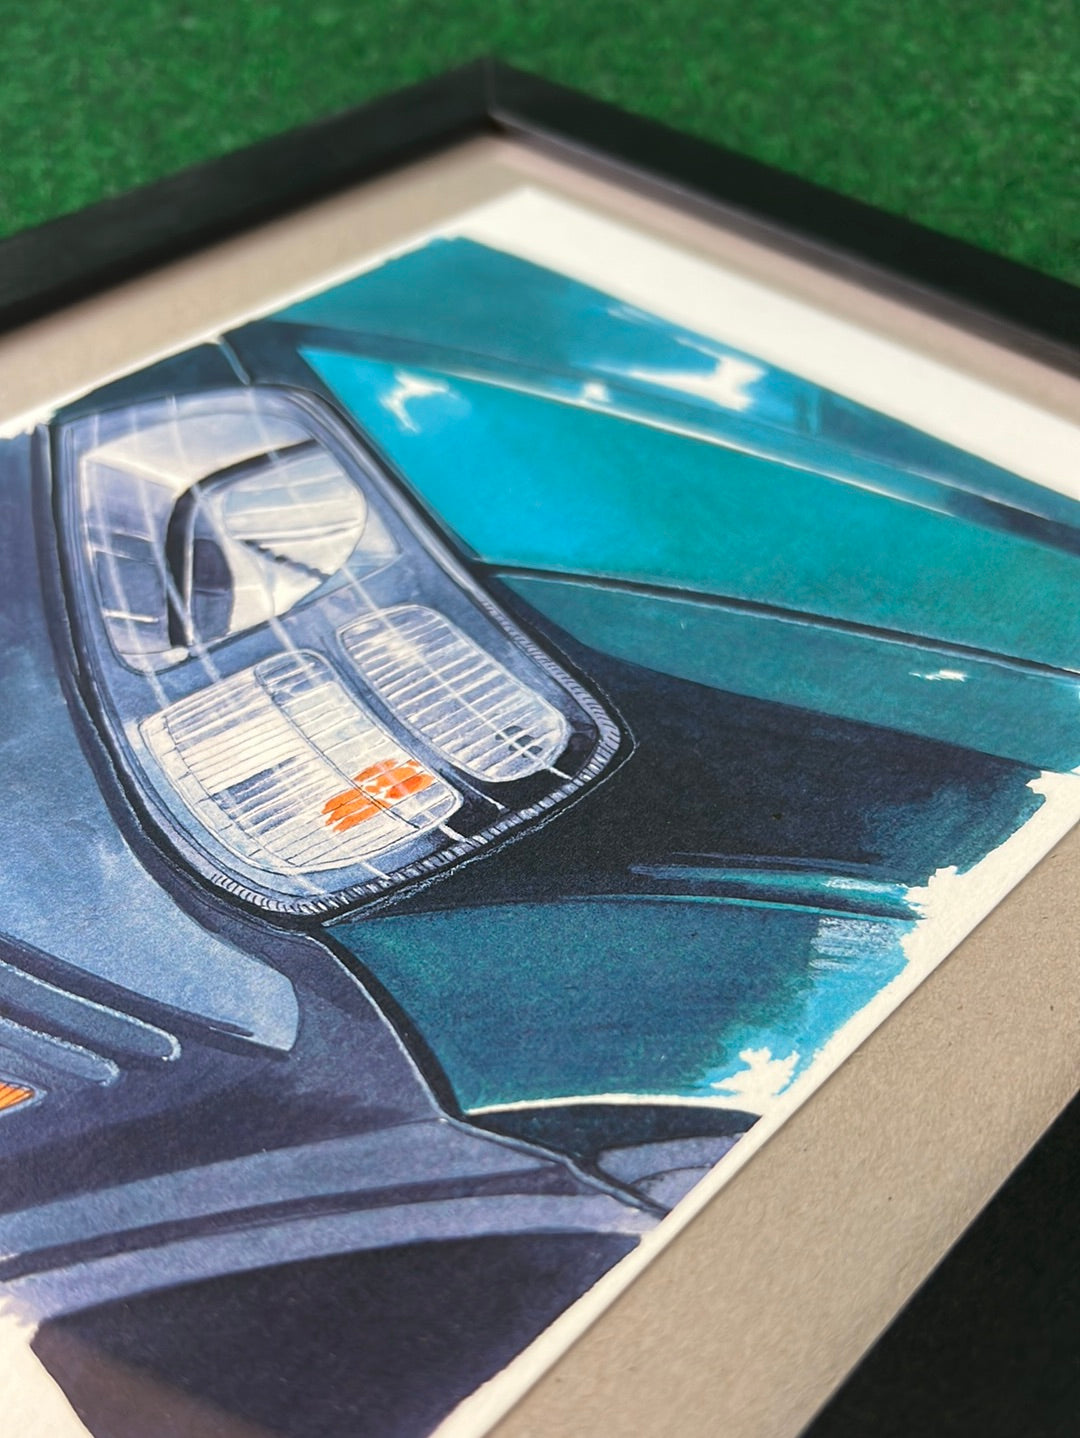 UNDERDOGZ - Honda CRV Front Left Headlight View Framed, Hand Drawn, Watercolor Painted & Signed Print